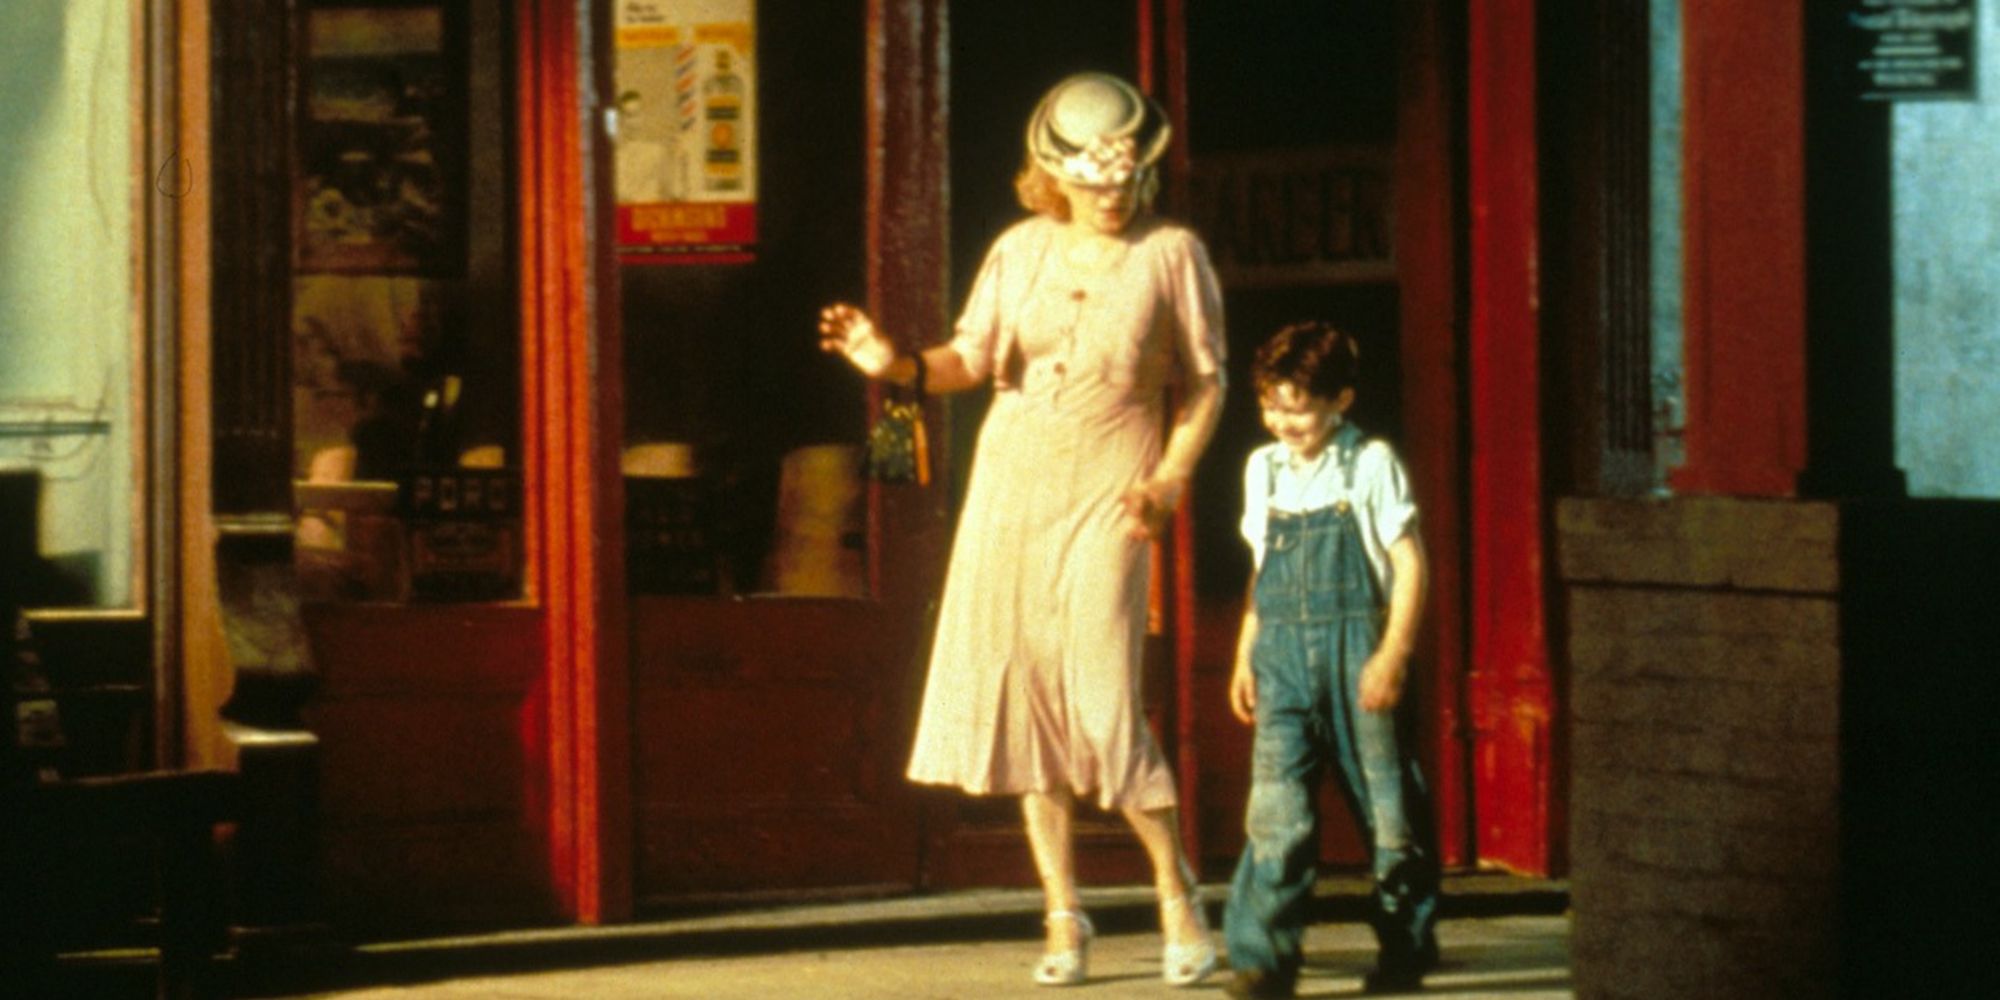 Gena Rowlands as Mae walking down the street with young David in The Neon Bible.